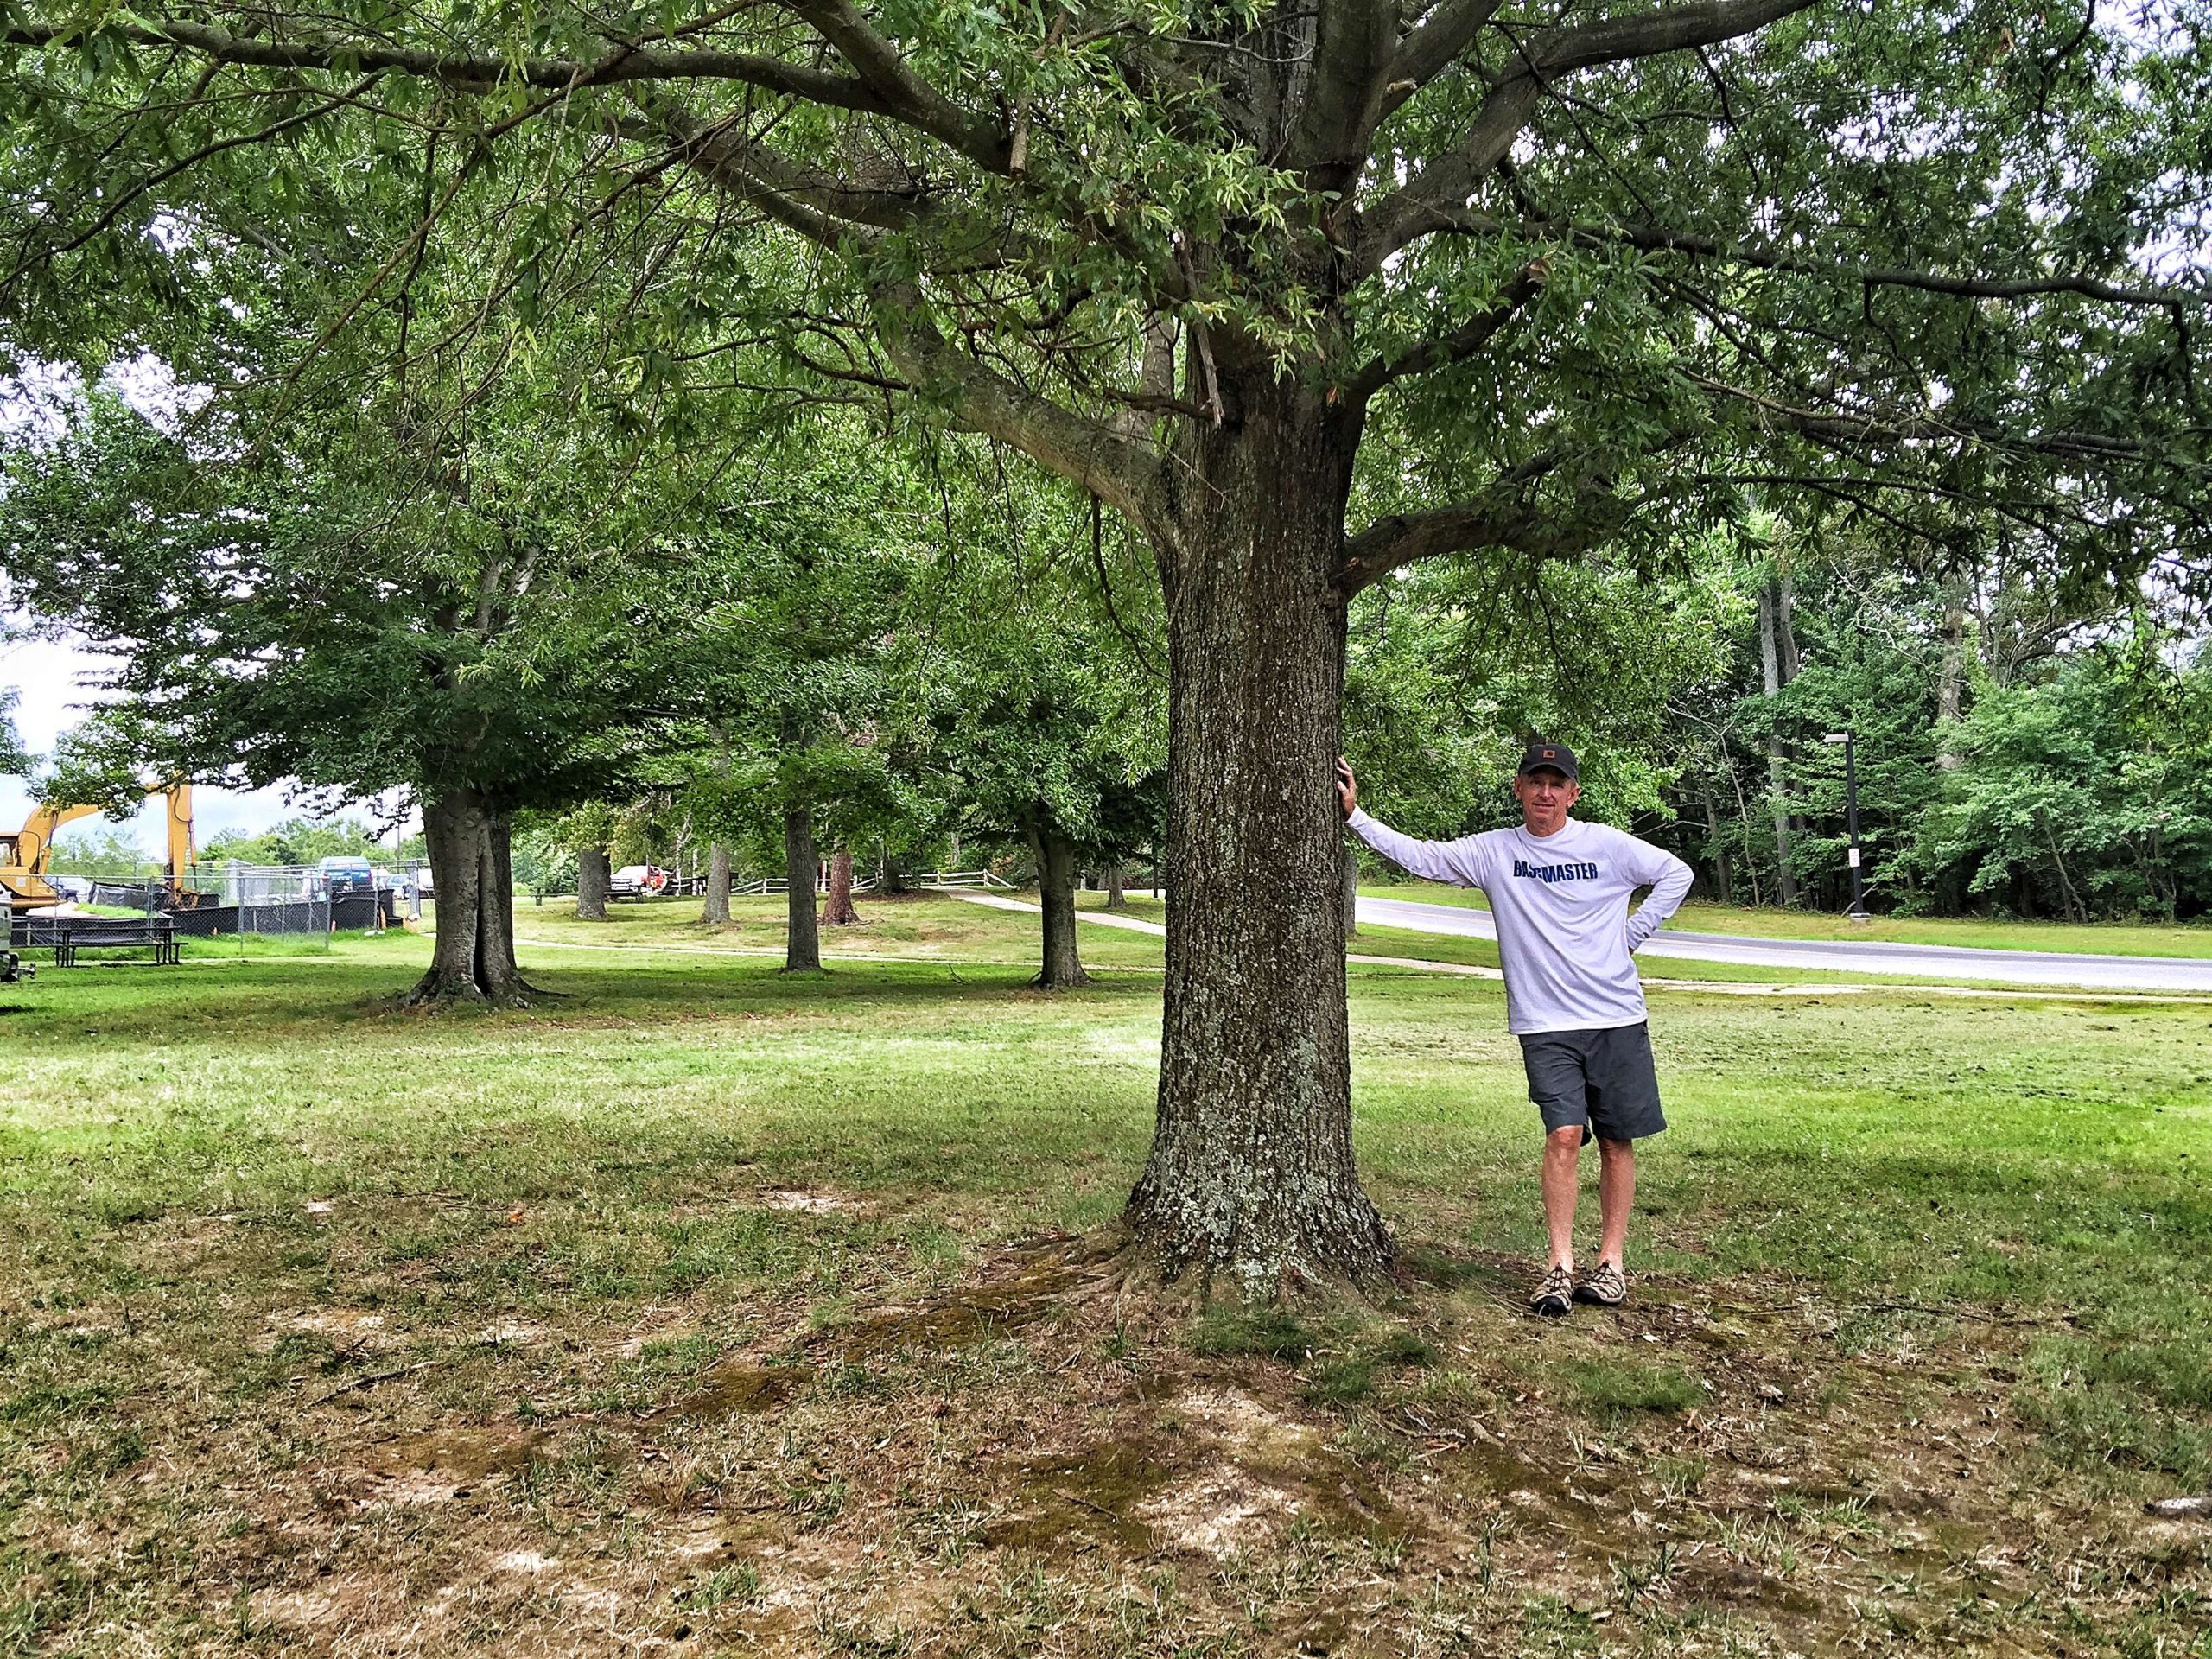 Before Tournament Director guru Trip Weldon left, he called me over and said exactly this, âYou know how many times Iâve been here, you see this tree Iâm leaning againstâ¦â